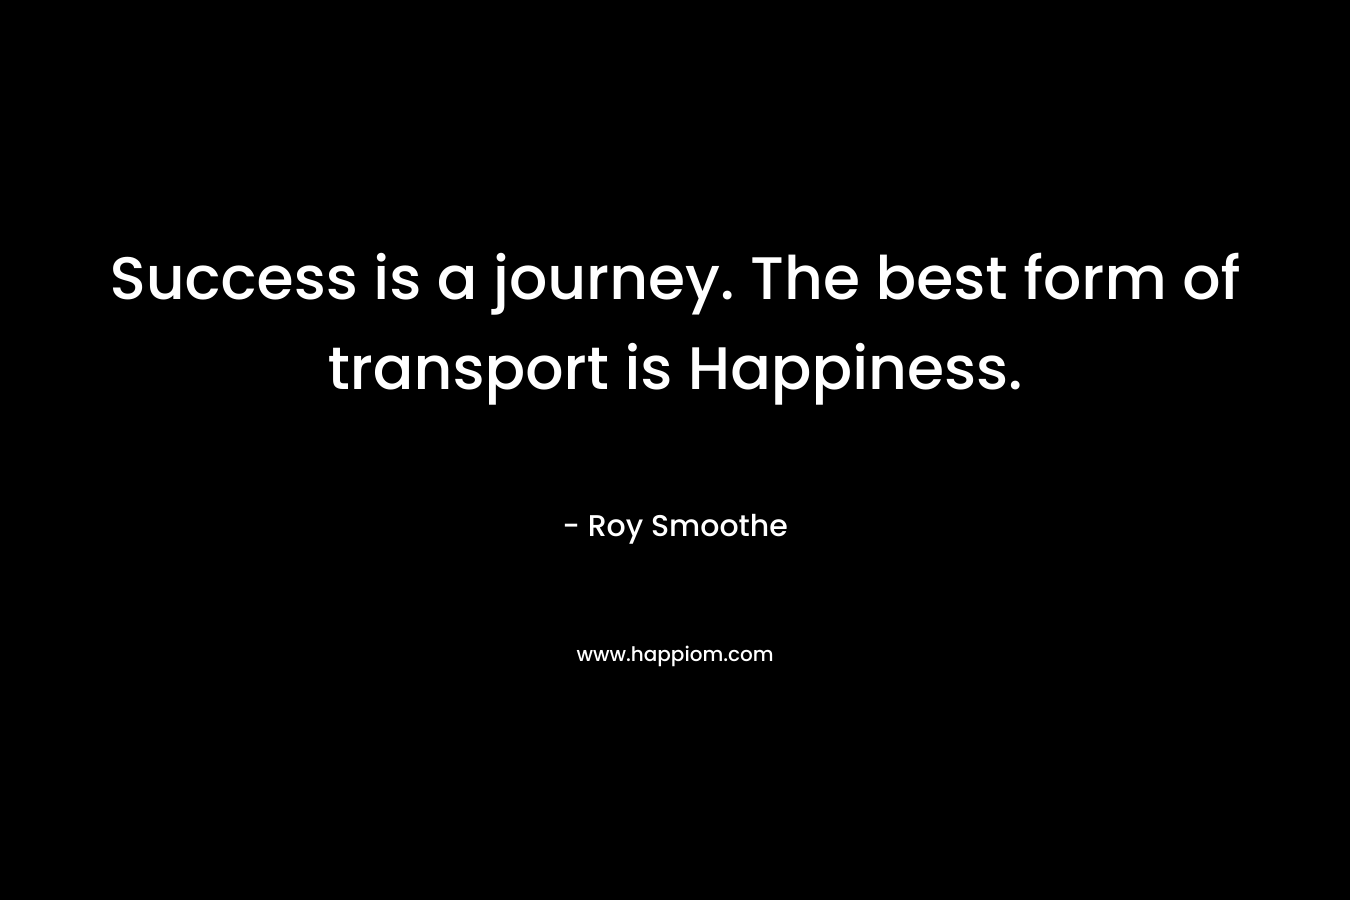 Success is a journey. The best form of transport is Happiness.